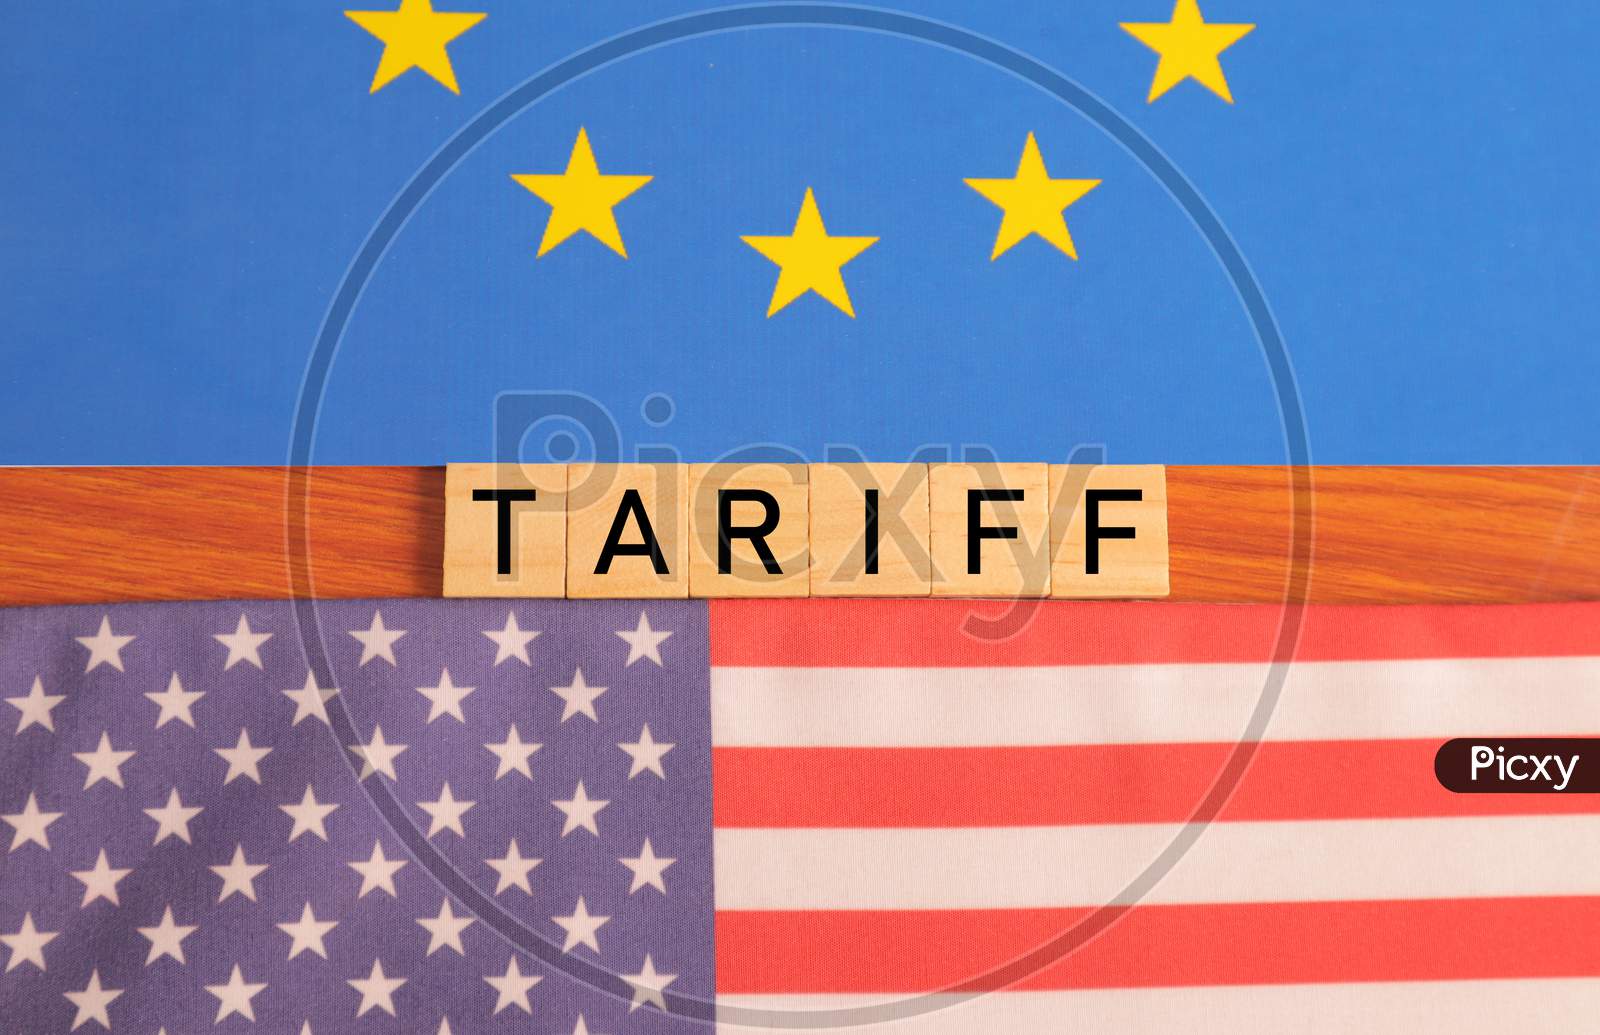 Concept Of Bilateral Relations And United States Of America Or Usa Tariff On Eu Or European Union Showing With Flags